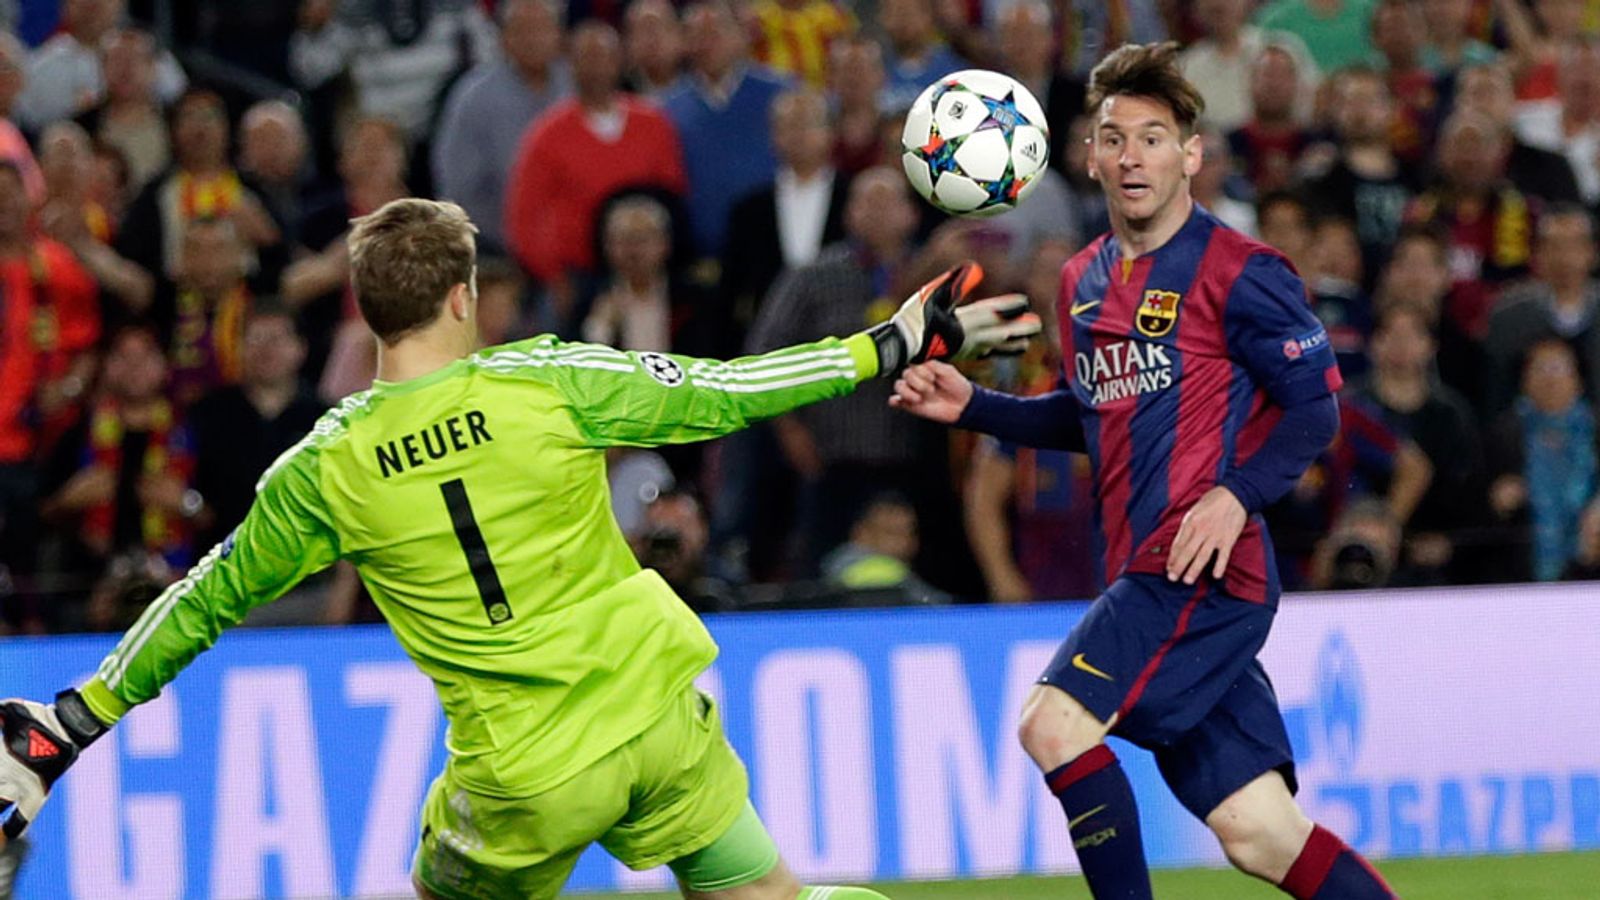 Lionel Messi's goal against Bayern Munich Where does it rank